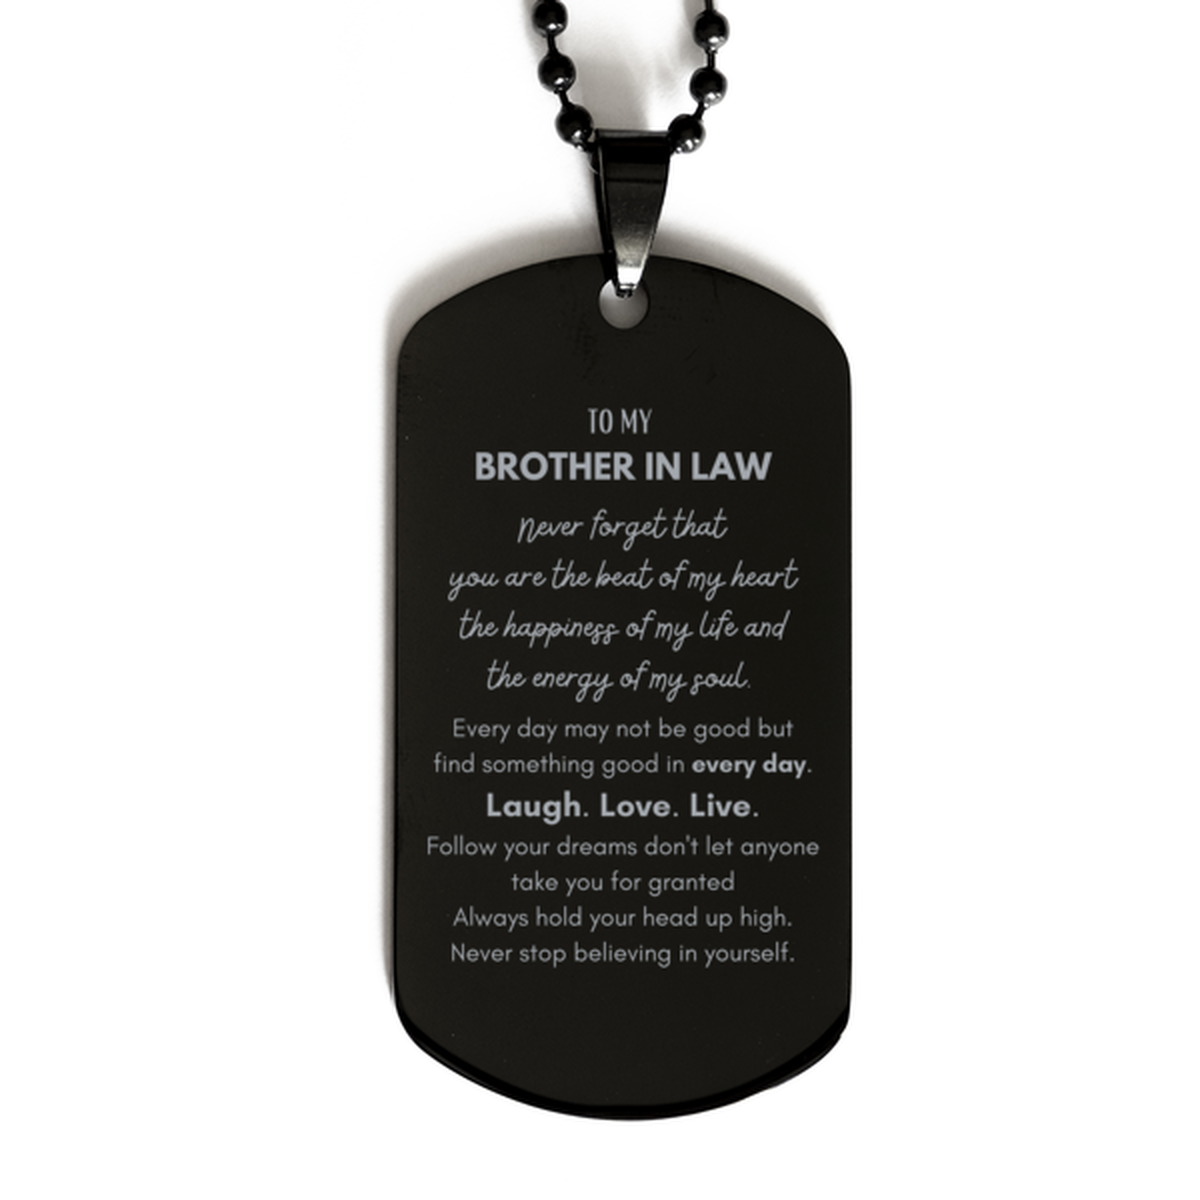 To My Brother In Law Dogtag Gifts, Christmas Brother In Law Black Dog Tag Present, Birthday Unique Motivational For Brother In Law, To My Brother In Law Never forget that you are the beat of my heart the happiness of my life and the energy of my soul